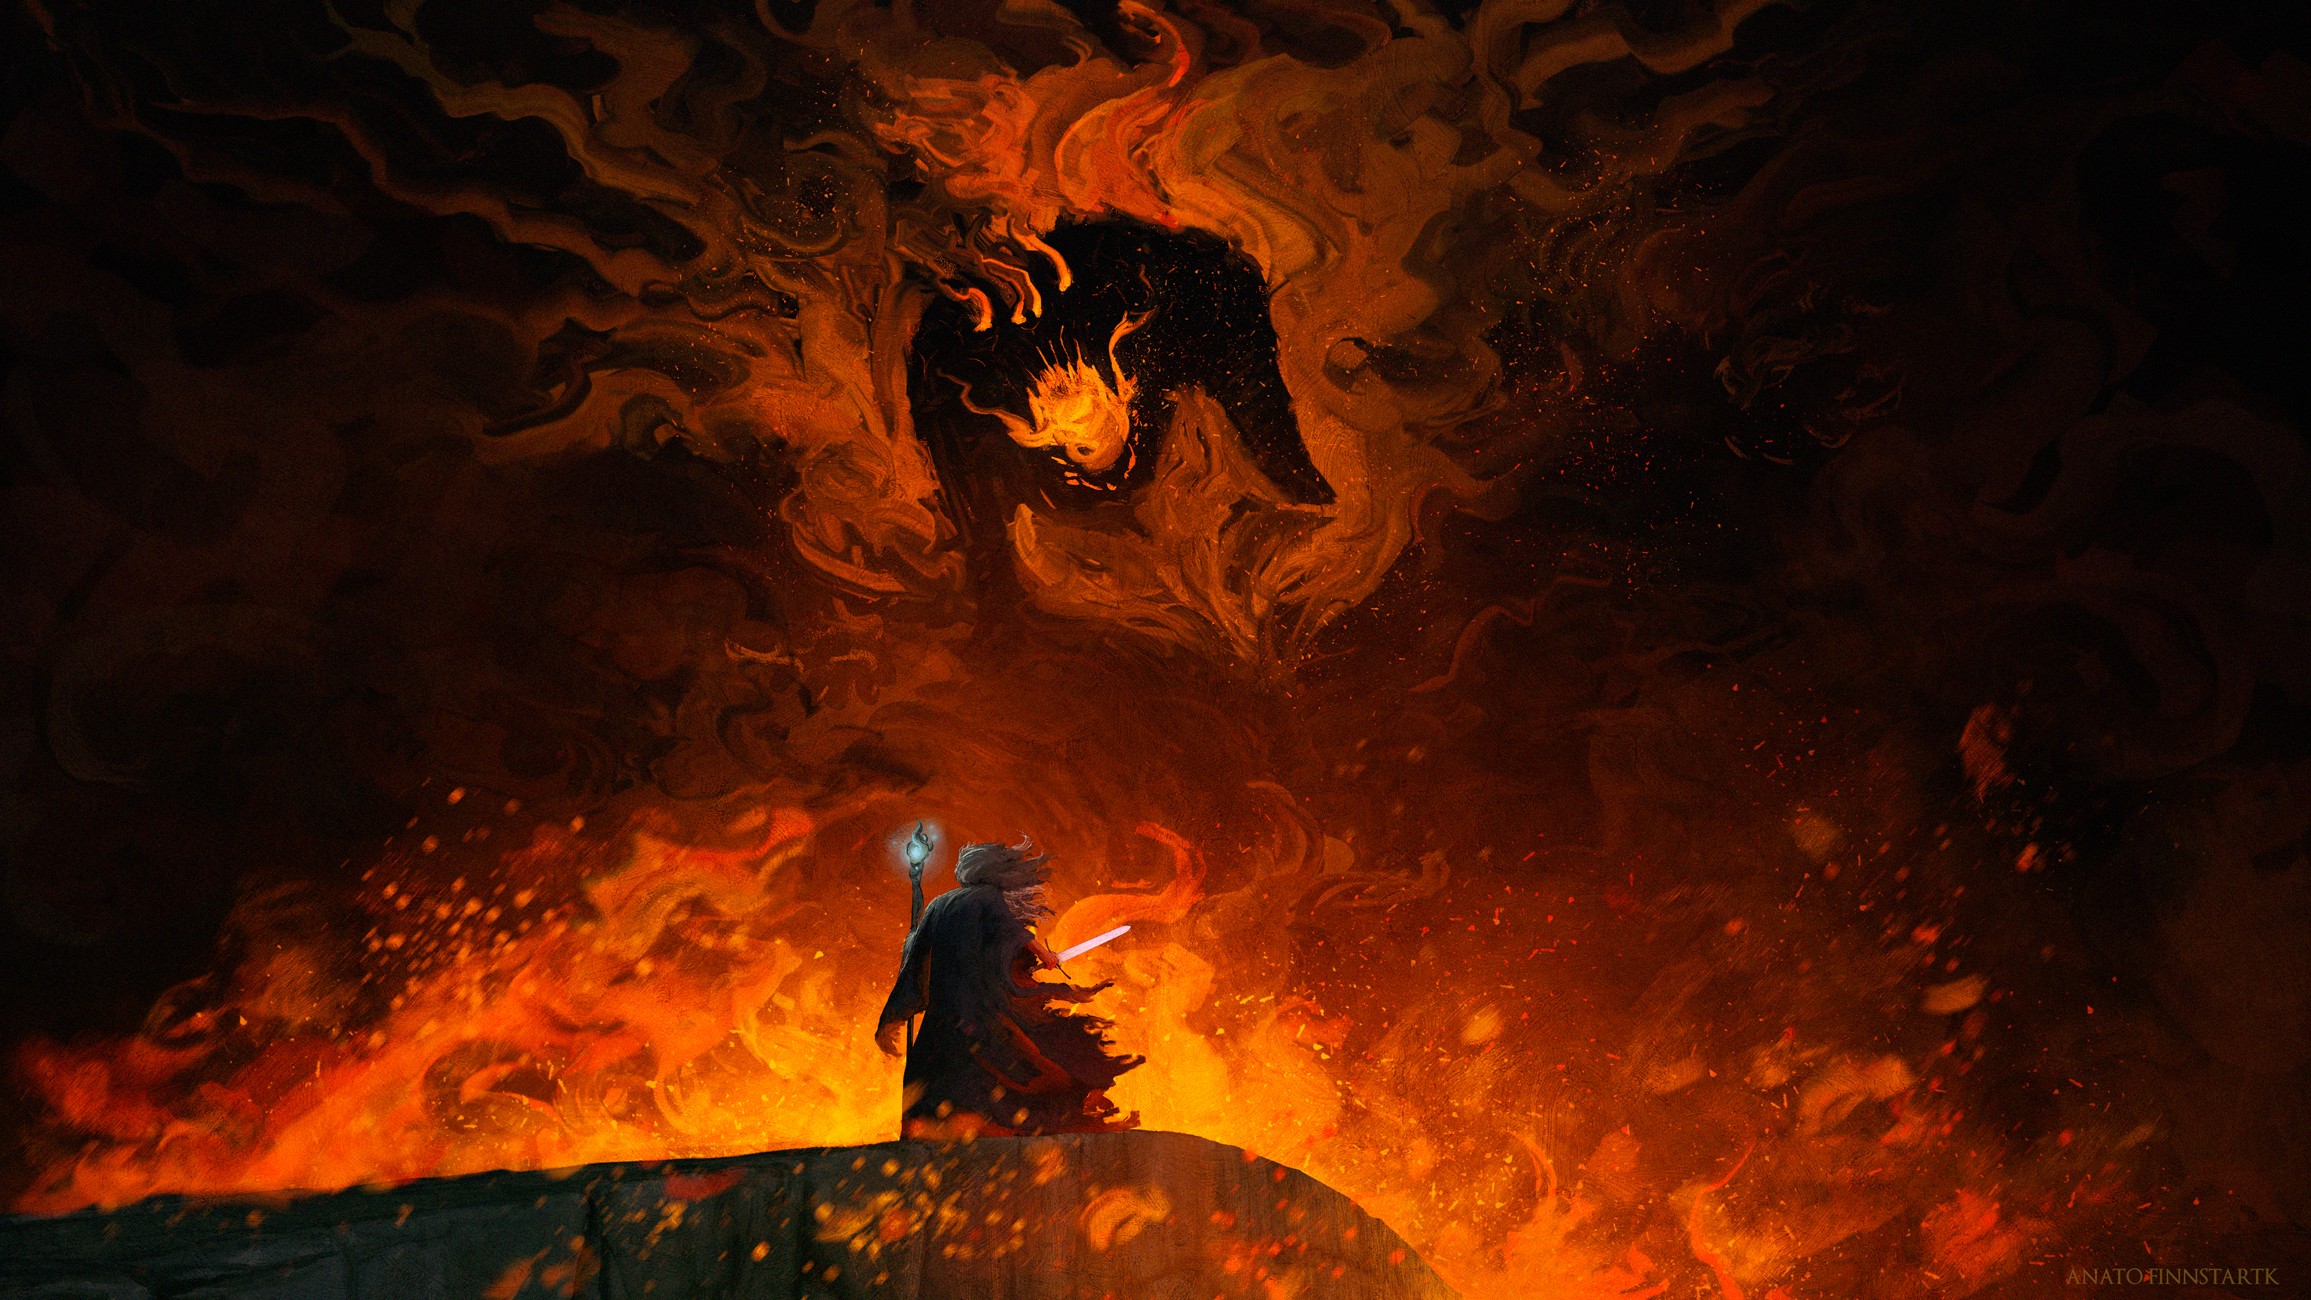 Balrog Lord Of The Rings Gandalf 2311x1300